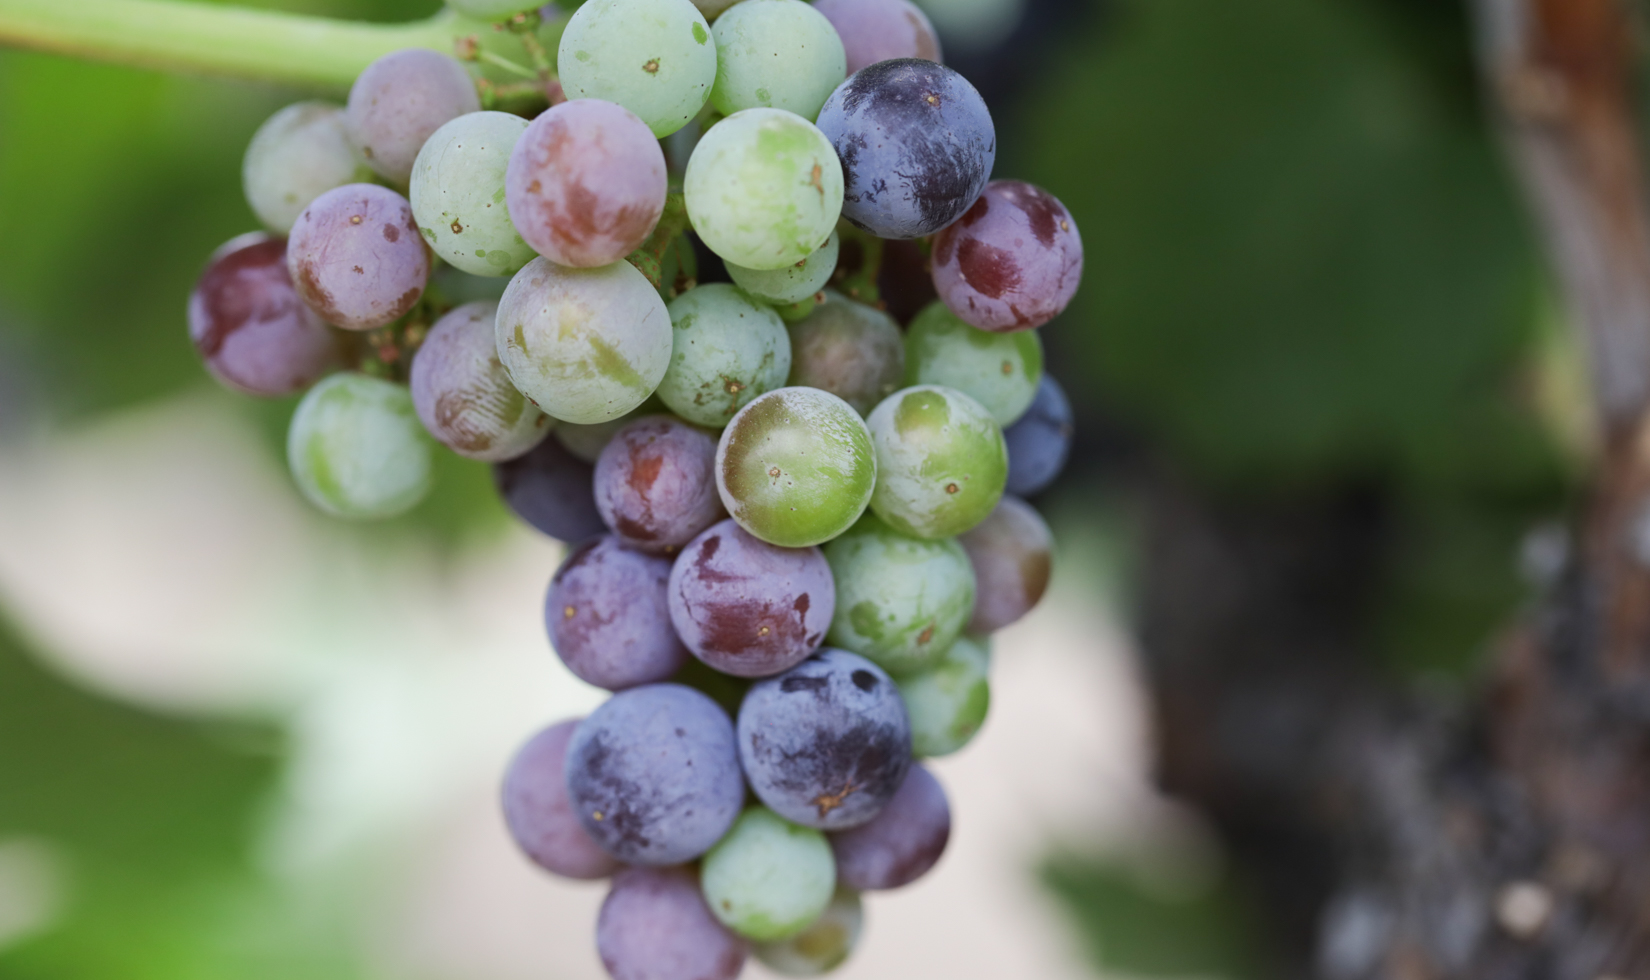 veraison on merlot grape cluster in vineyard. mix of green and purple berries on cluster.